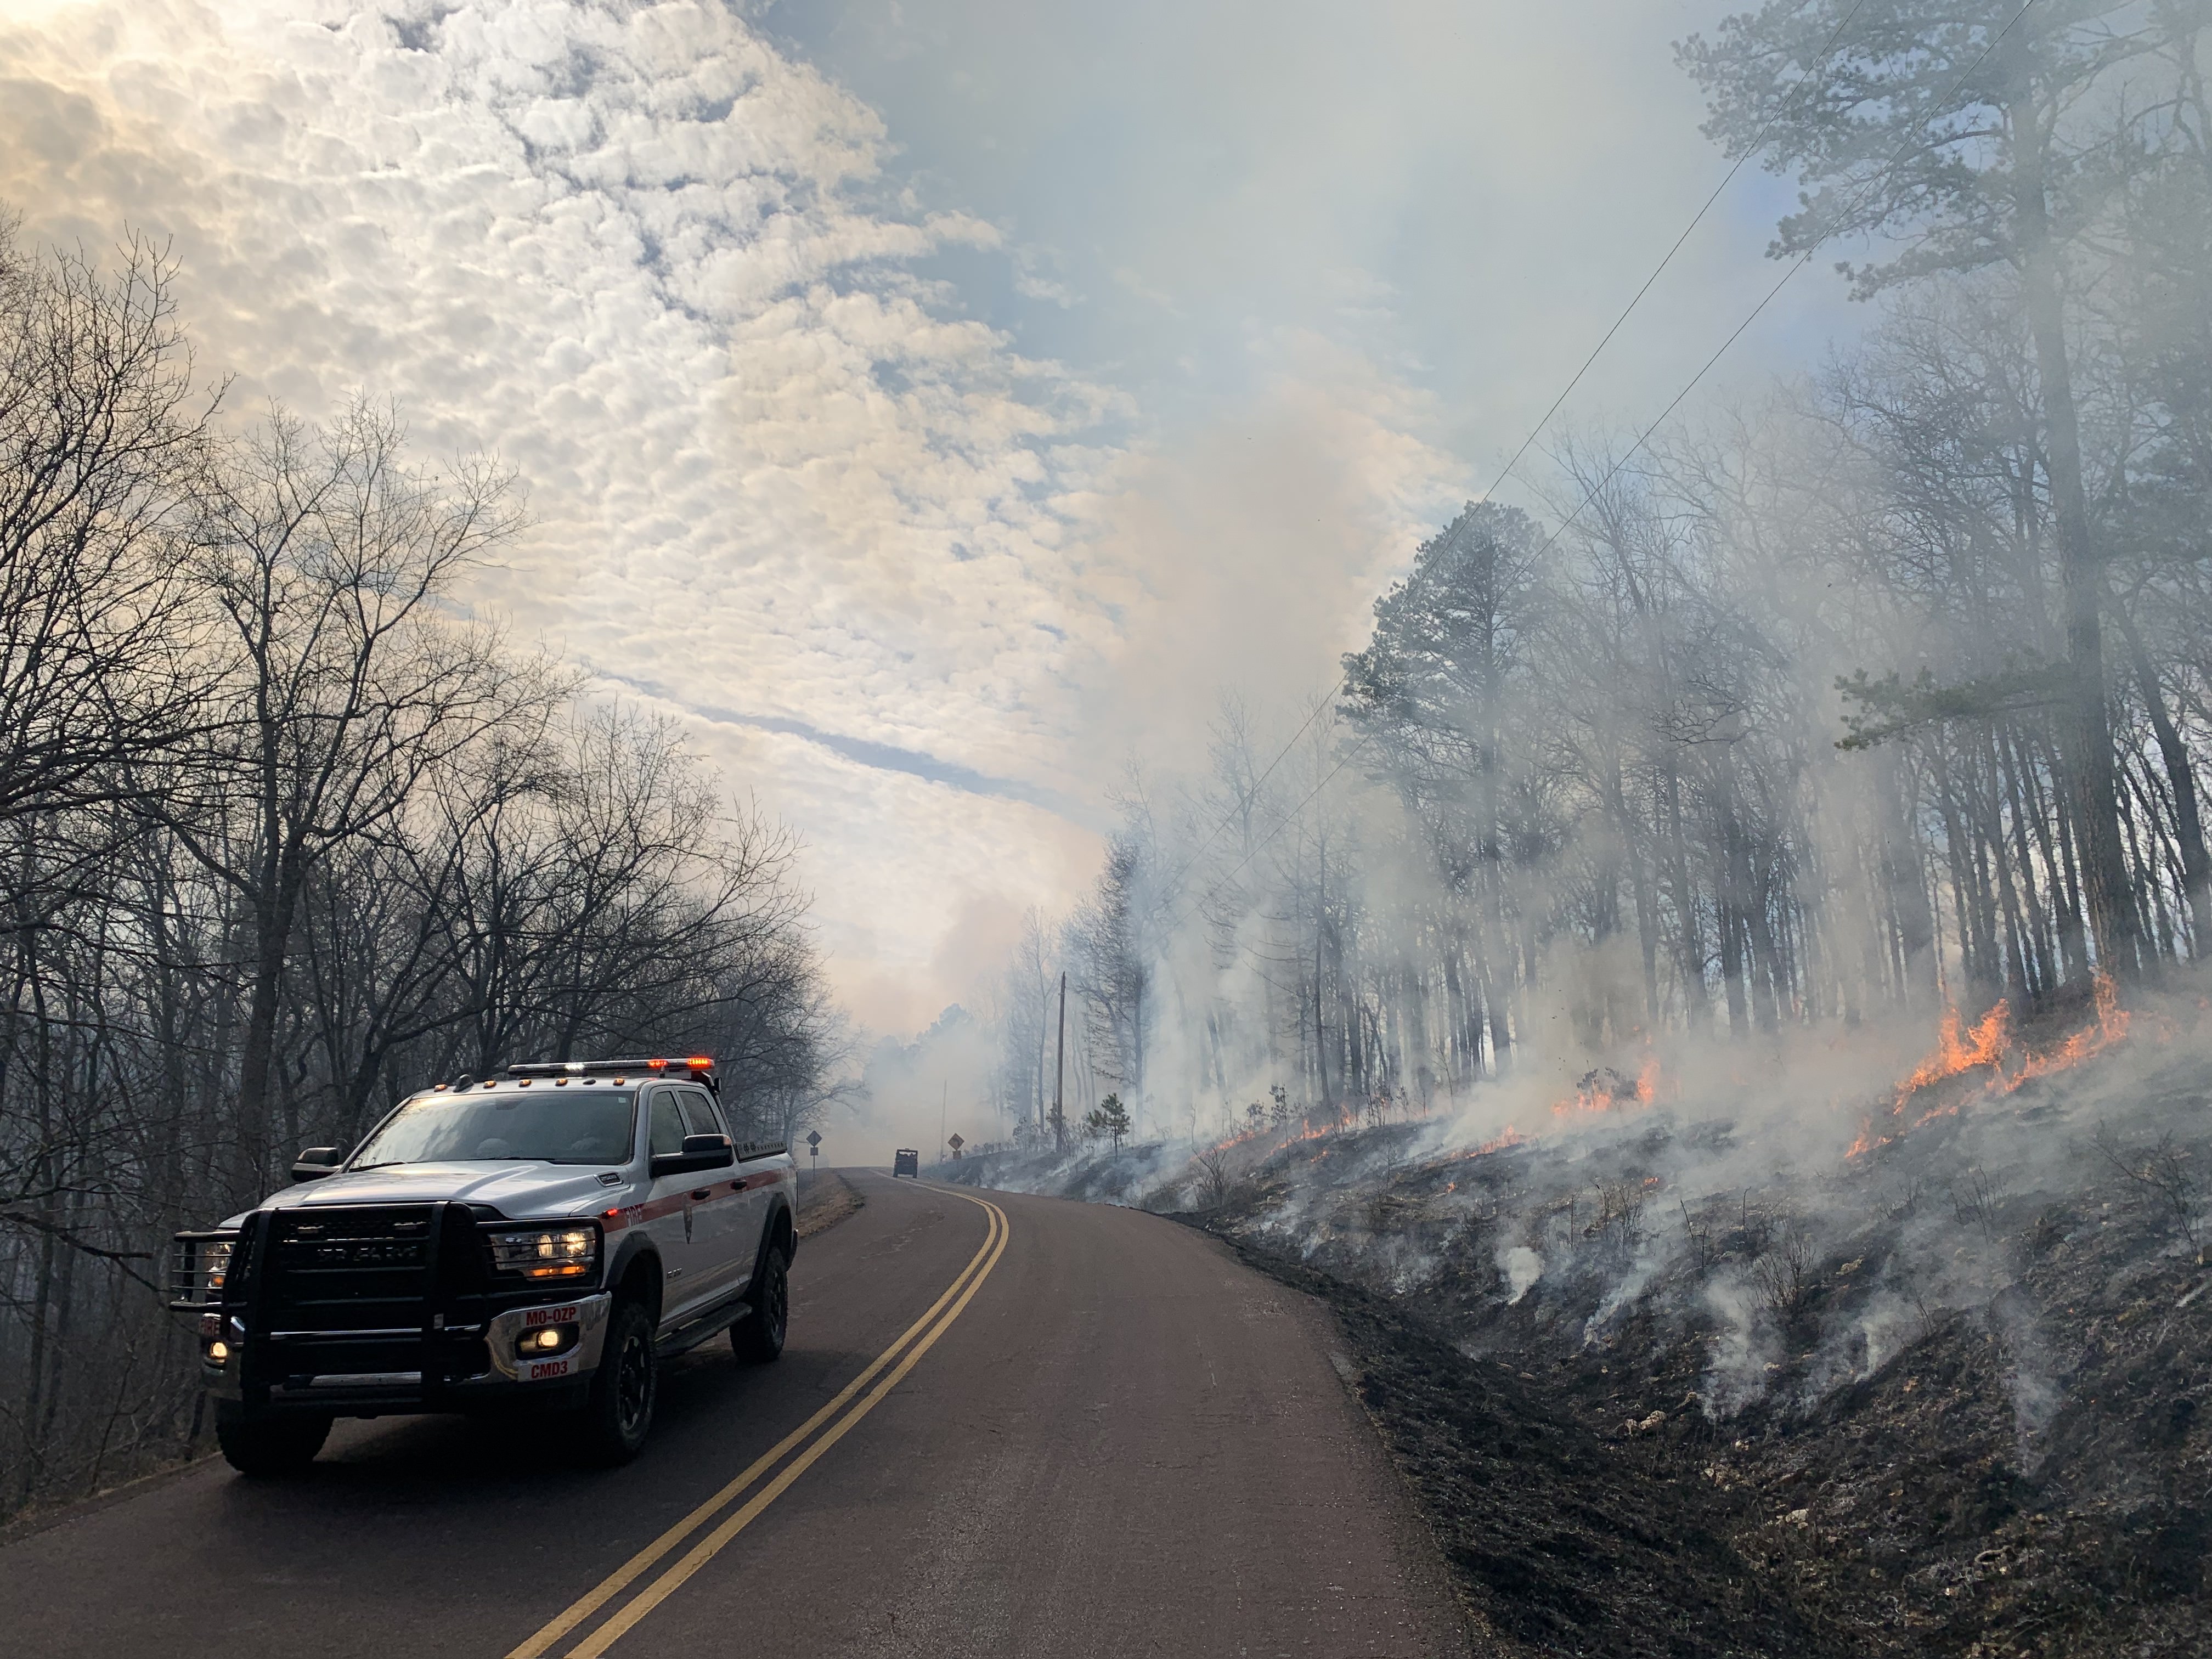 A national park service fire truck in country 2-lane highway with a smokey forest scene just off the road.